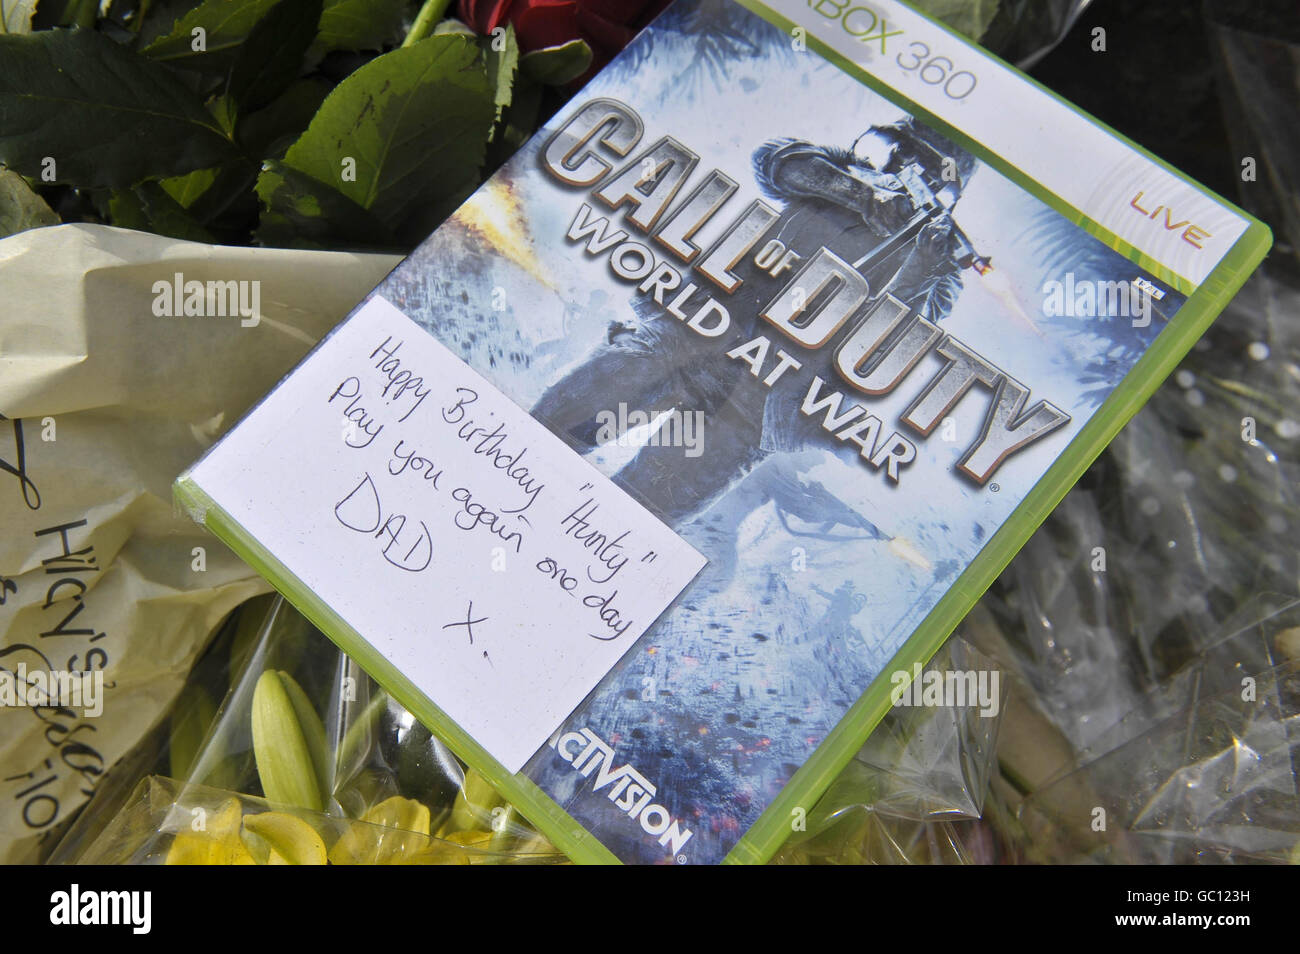 A copy of the X-Box game 'Call of Duty World at War' left by Phillip Hunt, the dad of Richard Hunt, the 200th soldier to die in Afghanistan on the base of the cenotaph at a memorial to celebrate Richard's life in his hometown of Abergavenny. Stock Photo